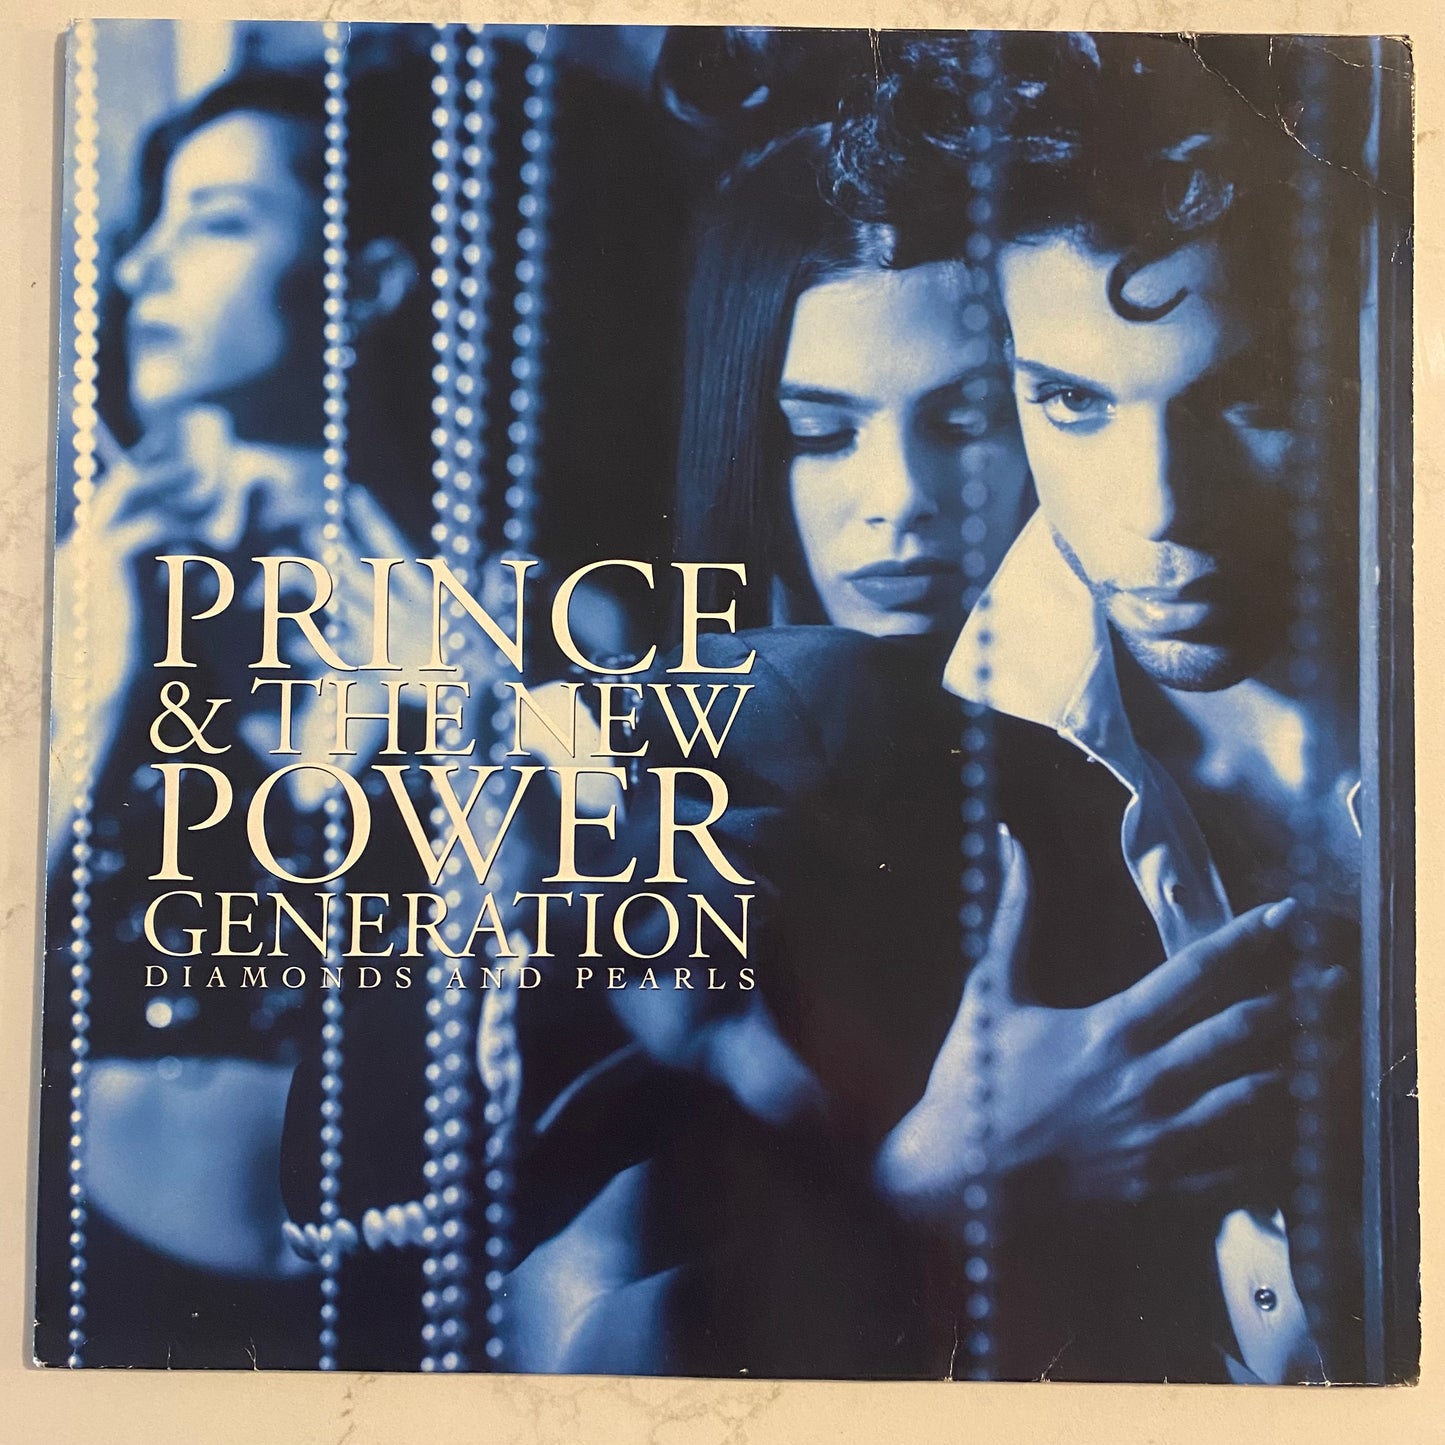 Prince & The New Power Generation - Diamonds And Pearls (2xLP, Album) (L)